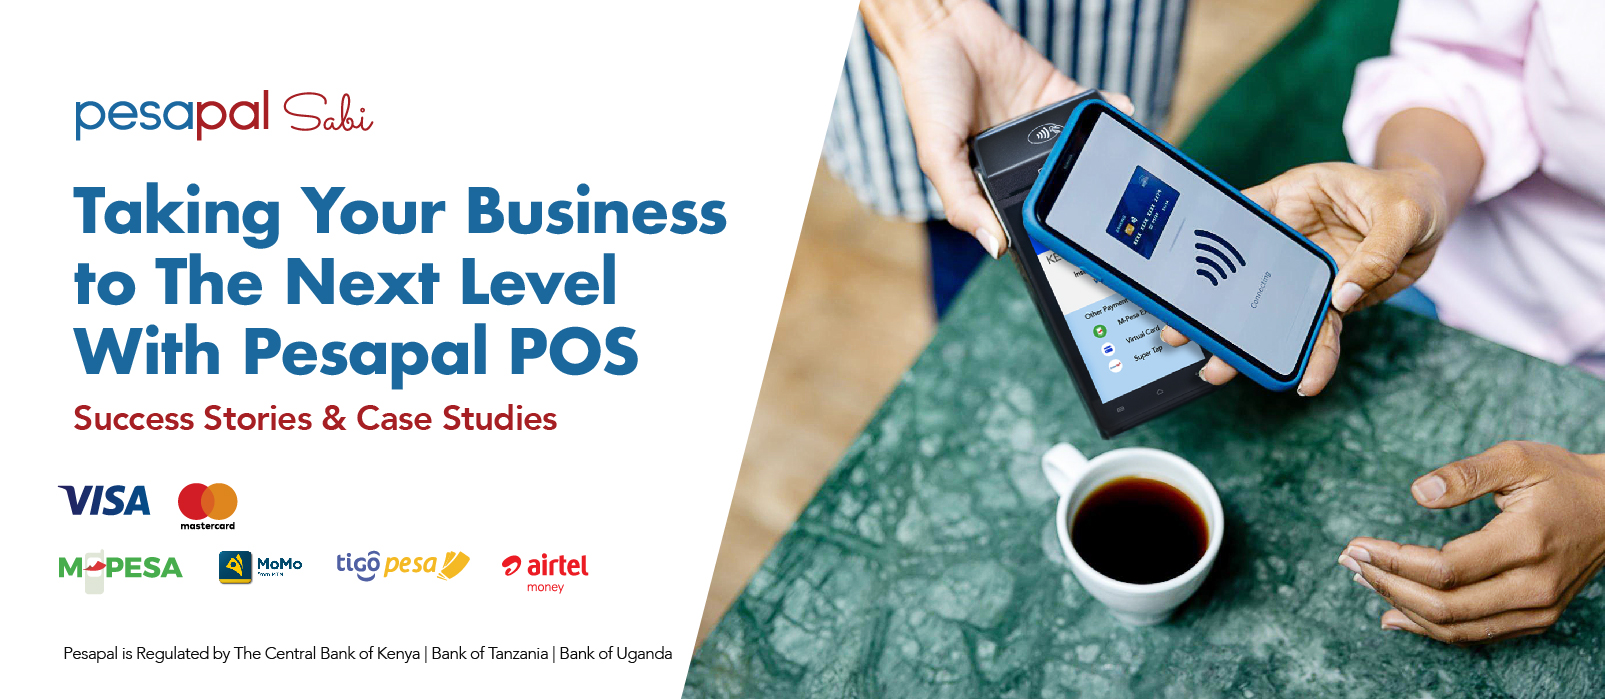 Taking Your Business to the Next Level with Pesapal POS: Success Stories and Case Studies